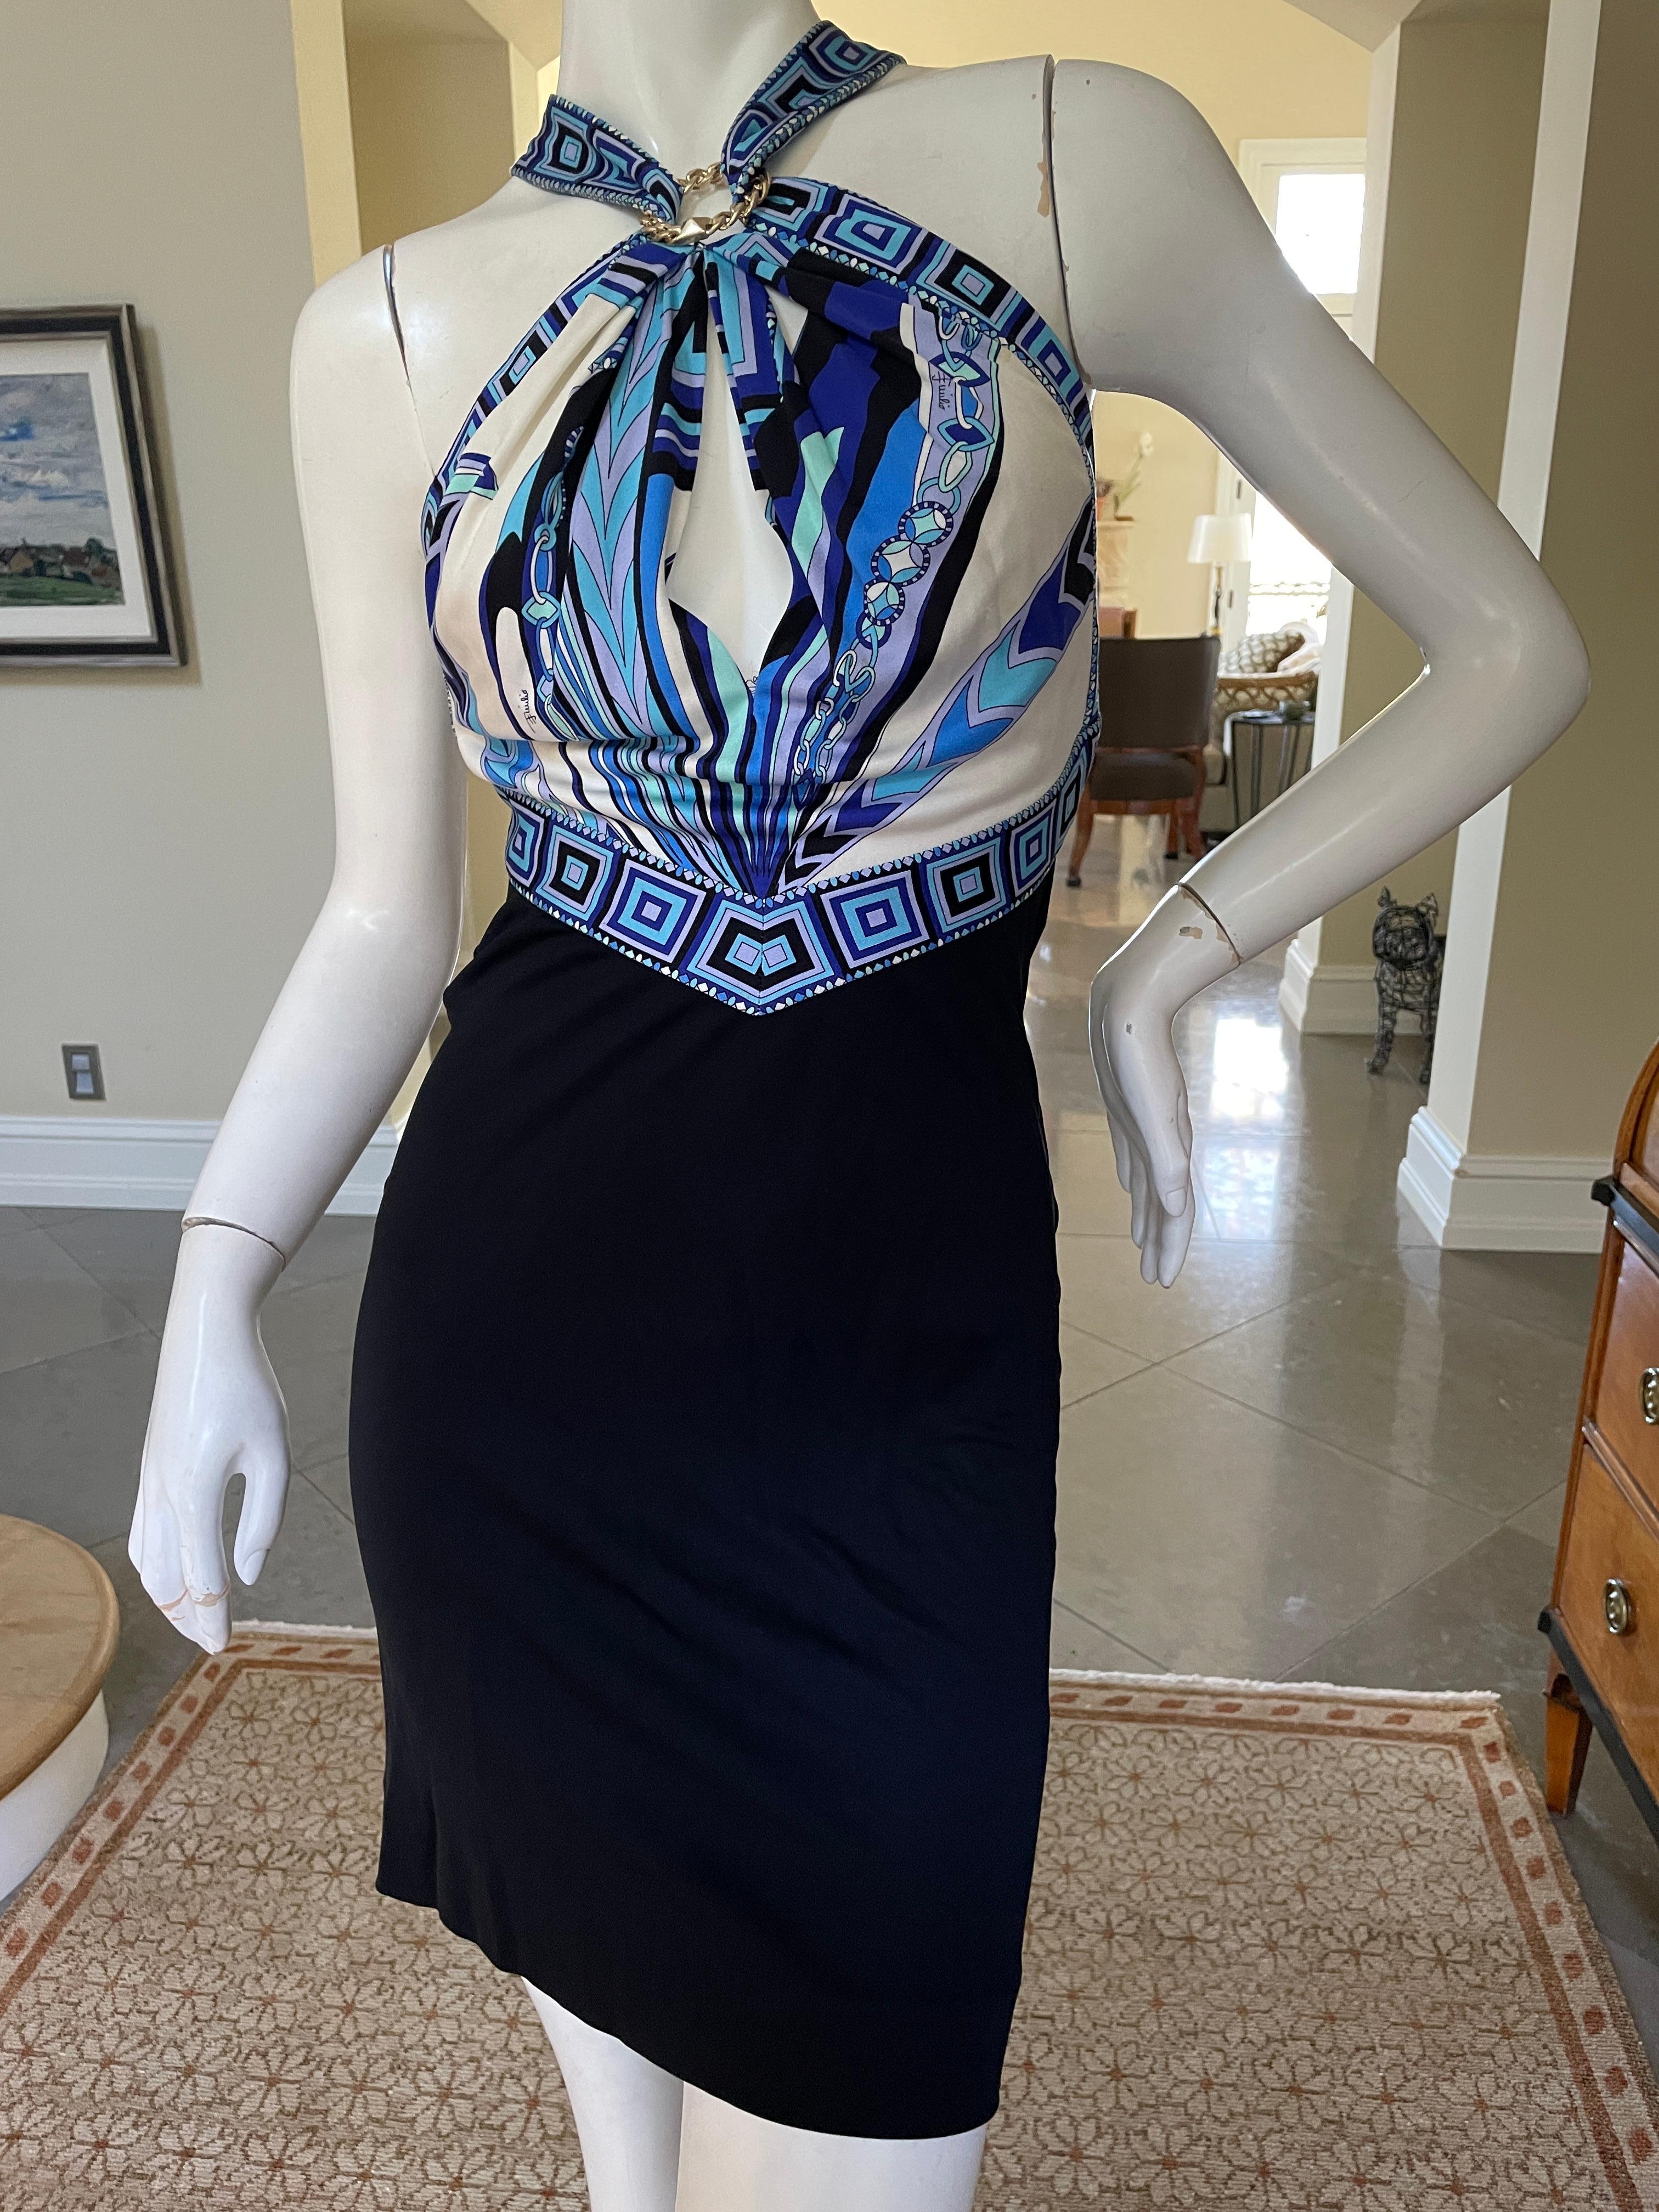 Emilio Pucci Chic Keyhole Halter Style Vintage Racer Back Mini Dress.
This is so much prettier in person, please use the zoom feature to see details.
Size 4  32 IT
Bust 36